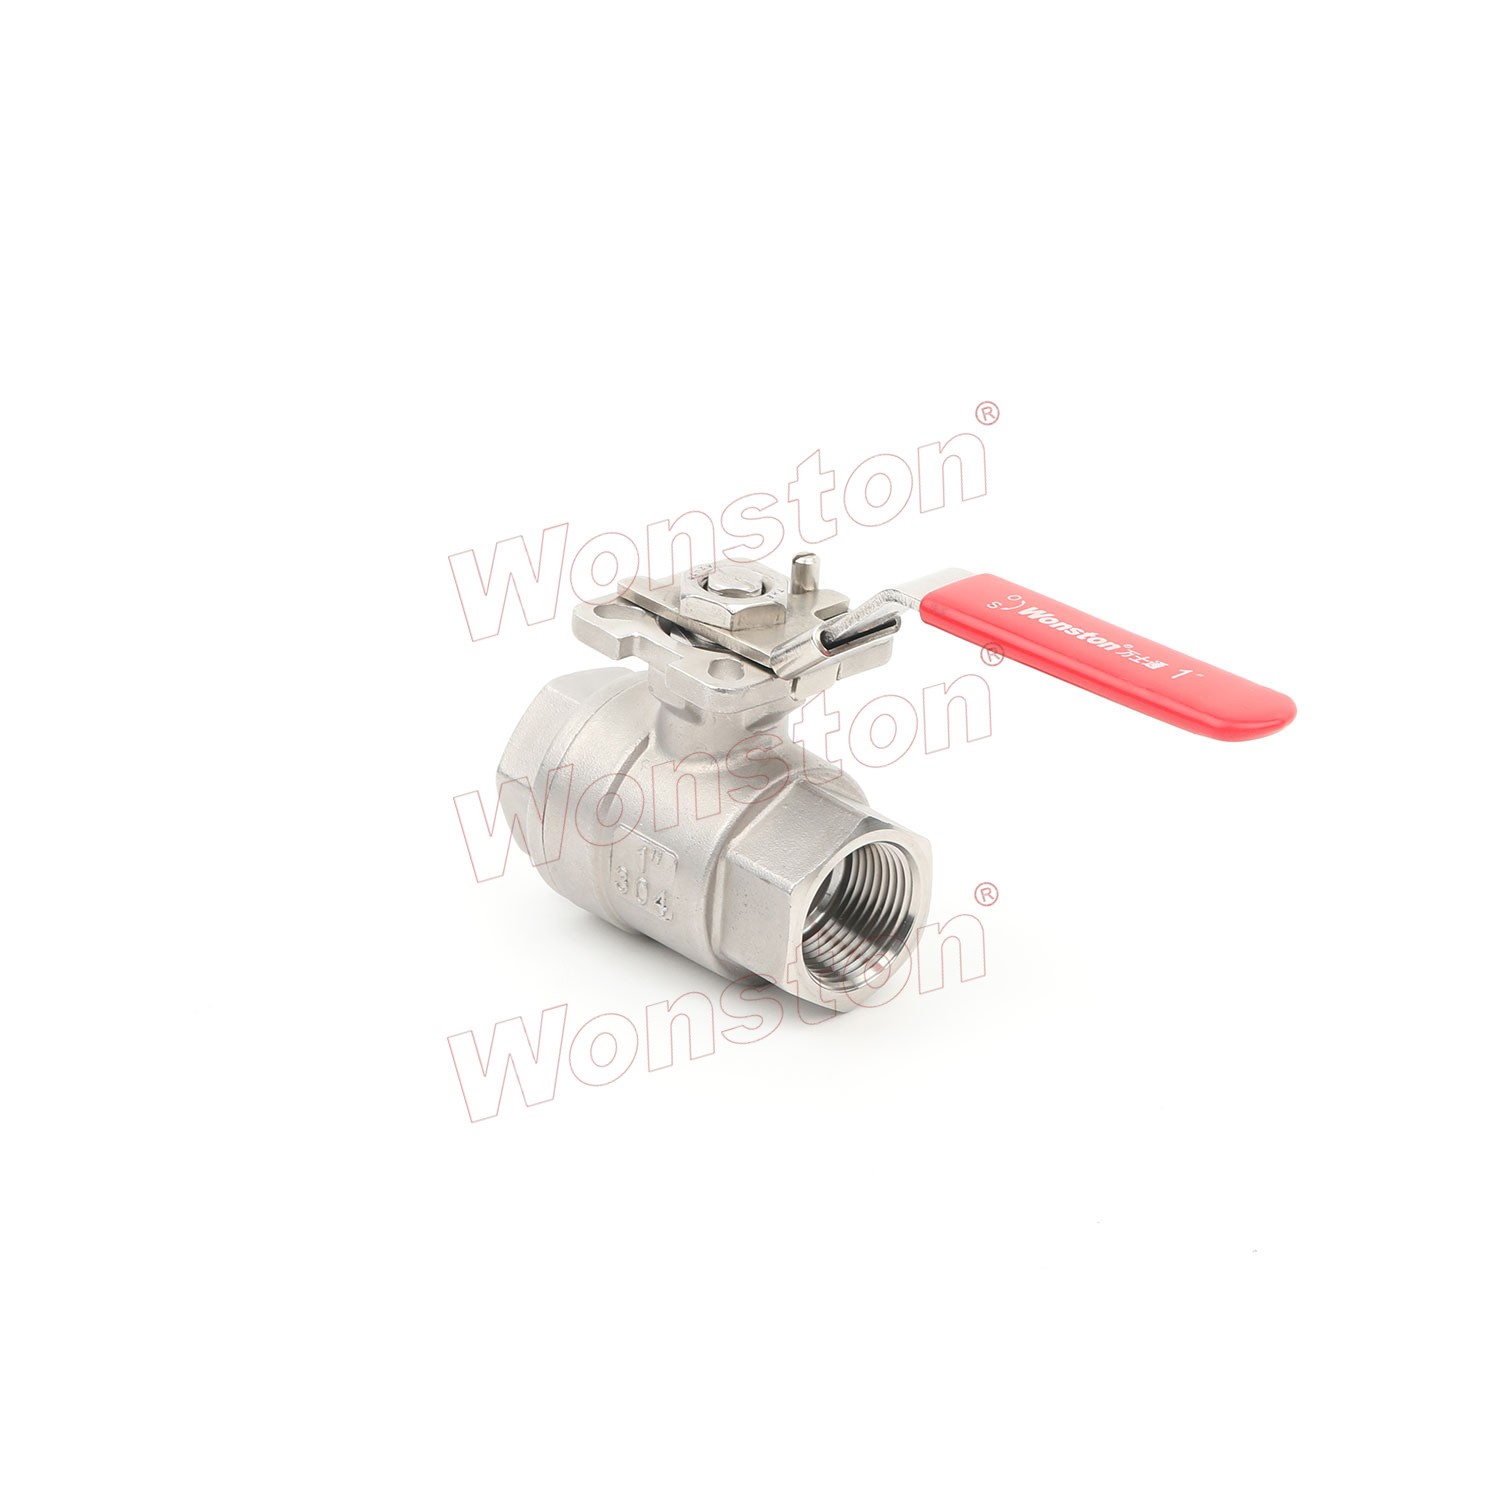 2PC Ball Valve With Direct Mounting Pad 1000WOG